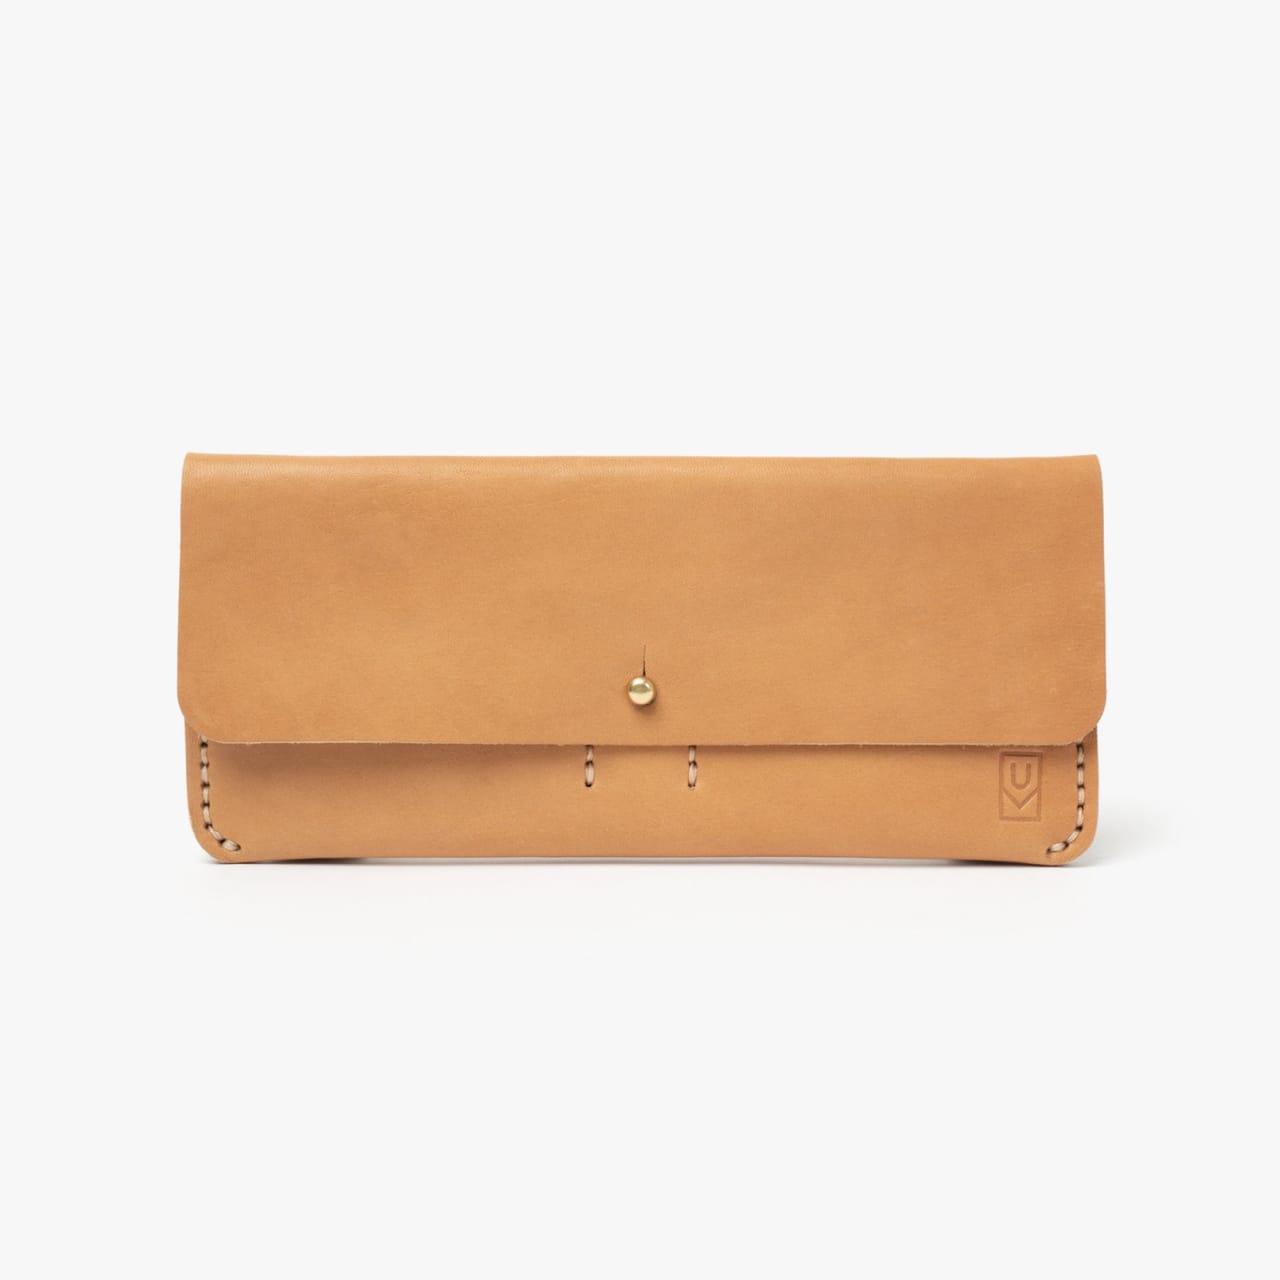 Front of Billfold Wallet in natural leather.